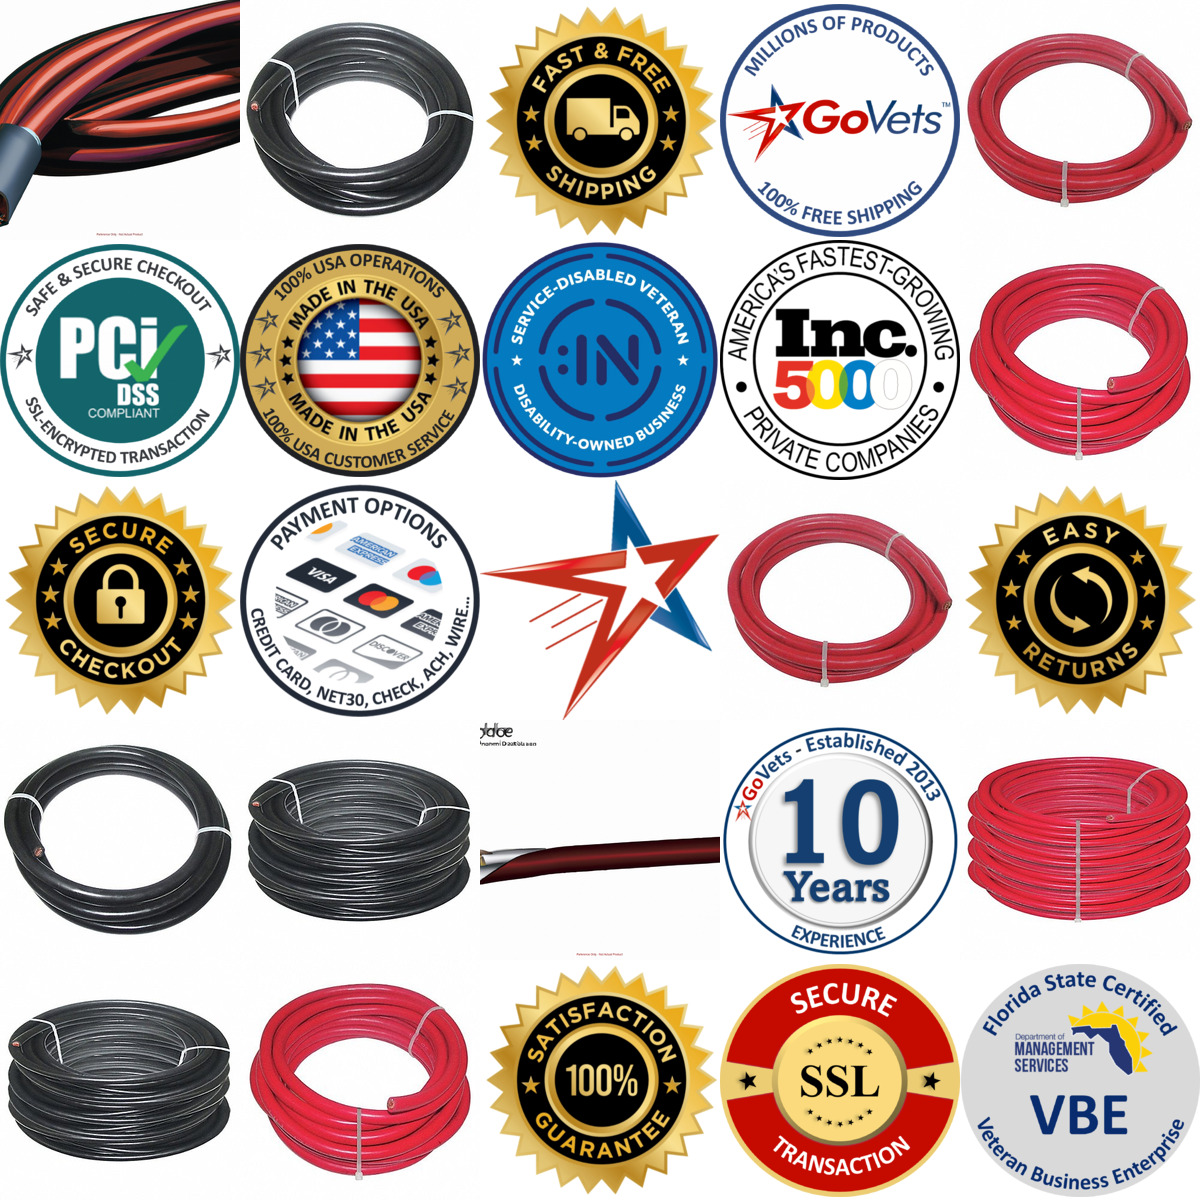 A selection of Welding Cable products on GoVets